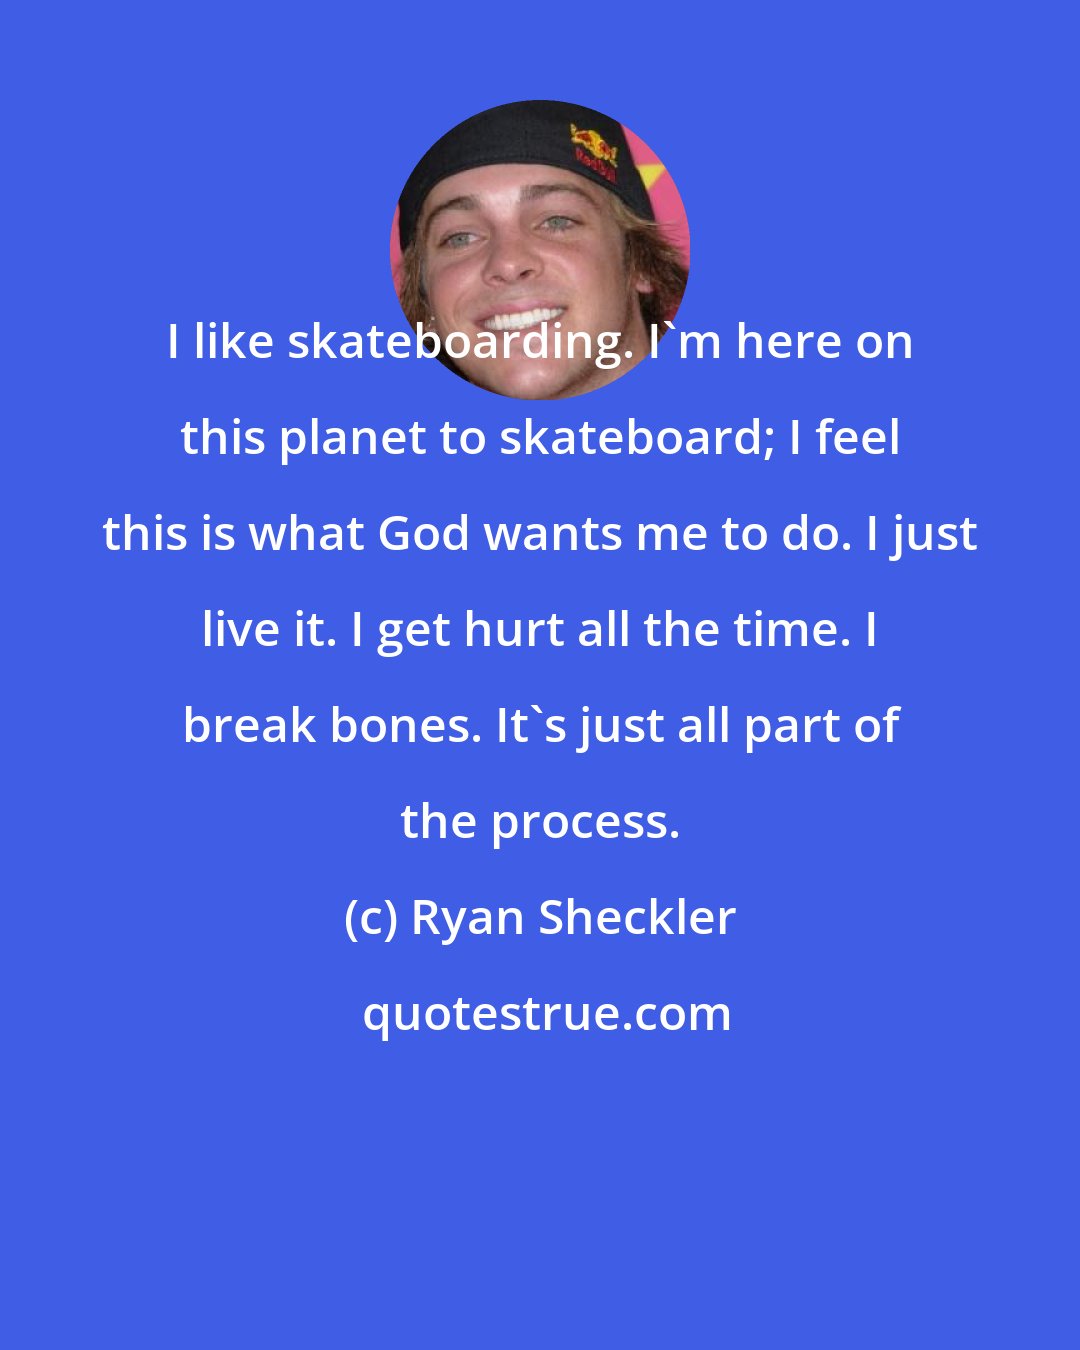 Ryan Sheckler: I like skateboarding. I'm here on this planet to skateboard; I feel this is what God wants me to do. I just live it. I get hurt all the time. I break bones. It's just all part of the process.